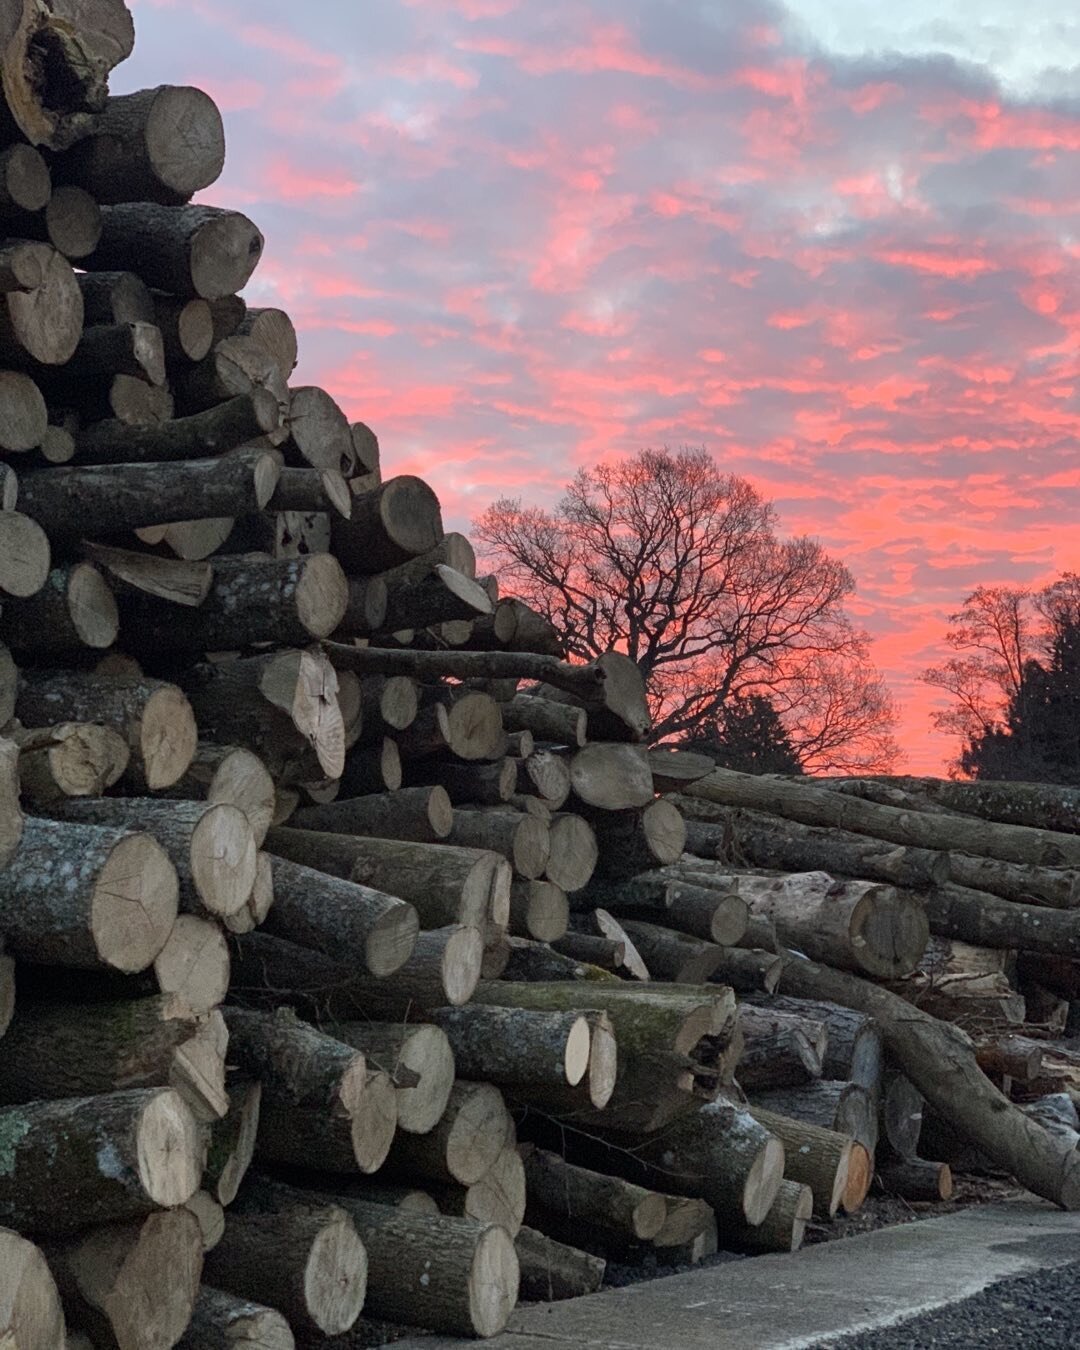 Beautiful morning for processing logs